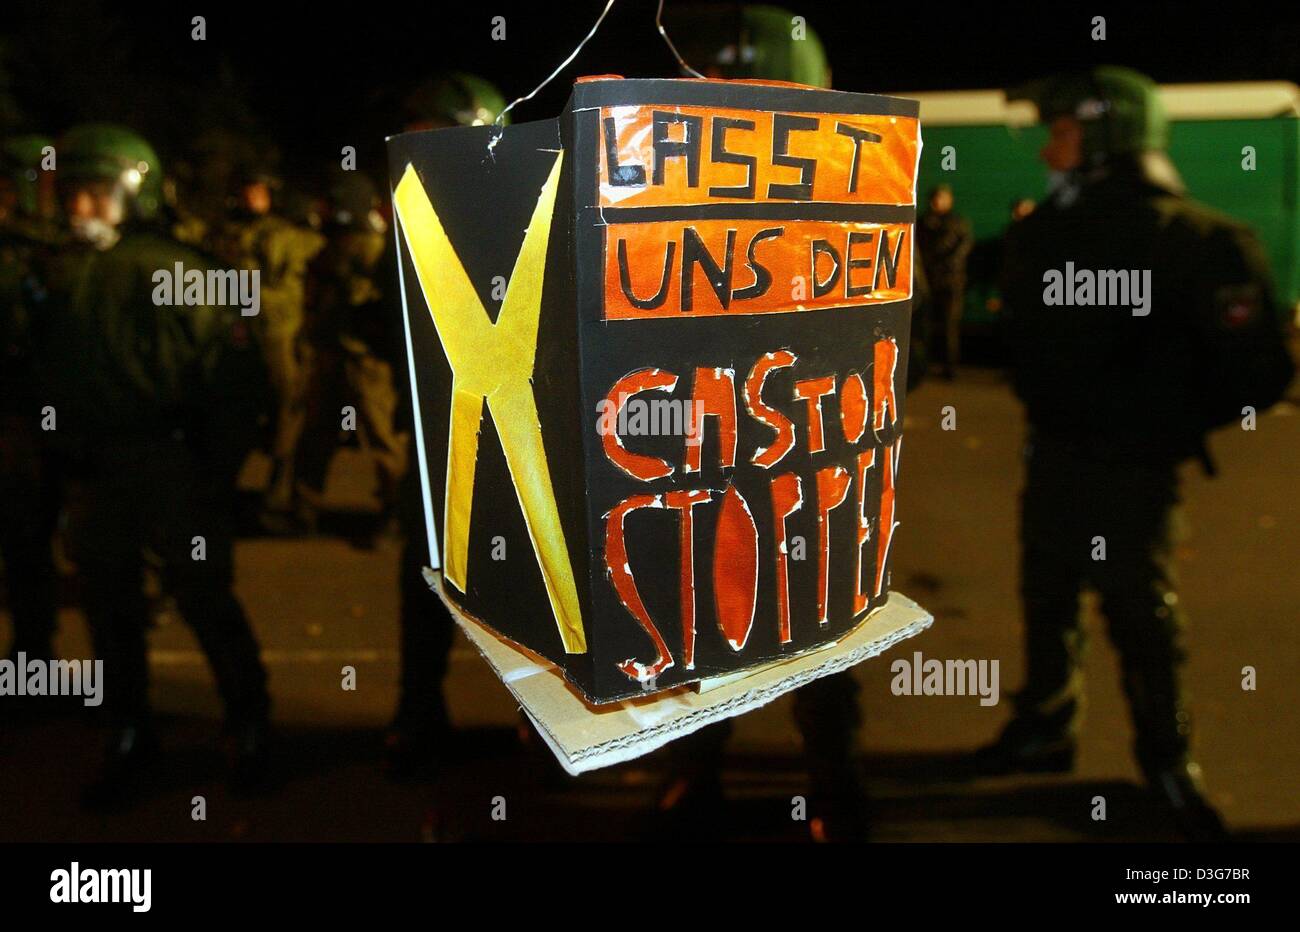 (dpa) - The writing on the illuminated self-made lantern reads 'Let's stop Castor' during a protest rally against the Castor transport of nuclear waste in Gross Gusborn, Germany 10 November 2003. Around 200 young protesters, supported by local farmers with their tractors, have blocked the railtracks along the route of the Castor transport. However, police managed to clear the track Stock Photo